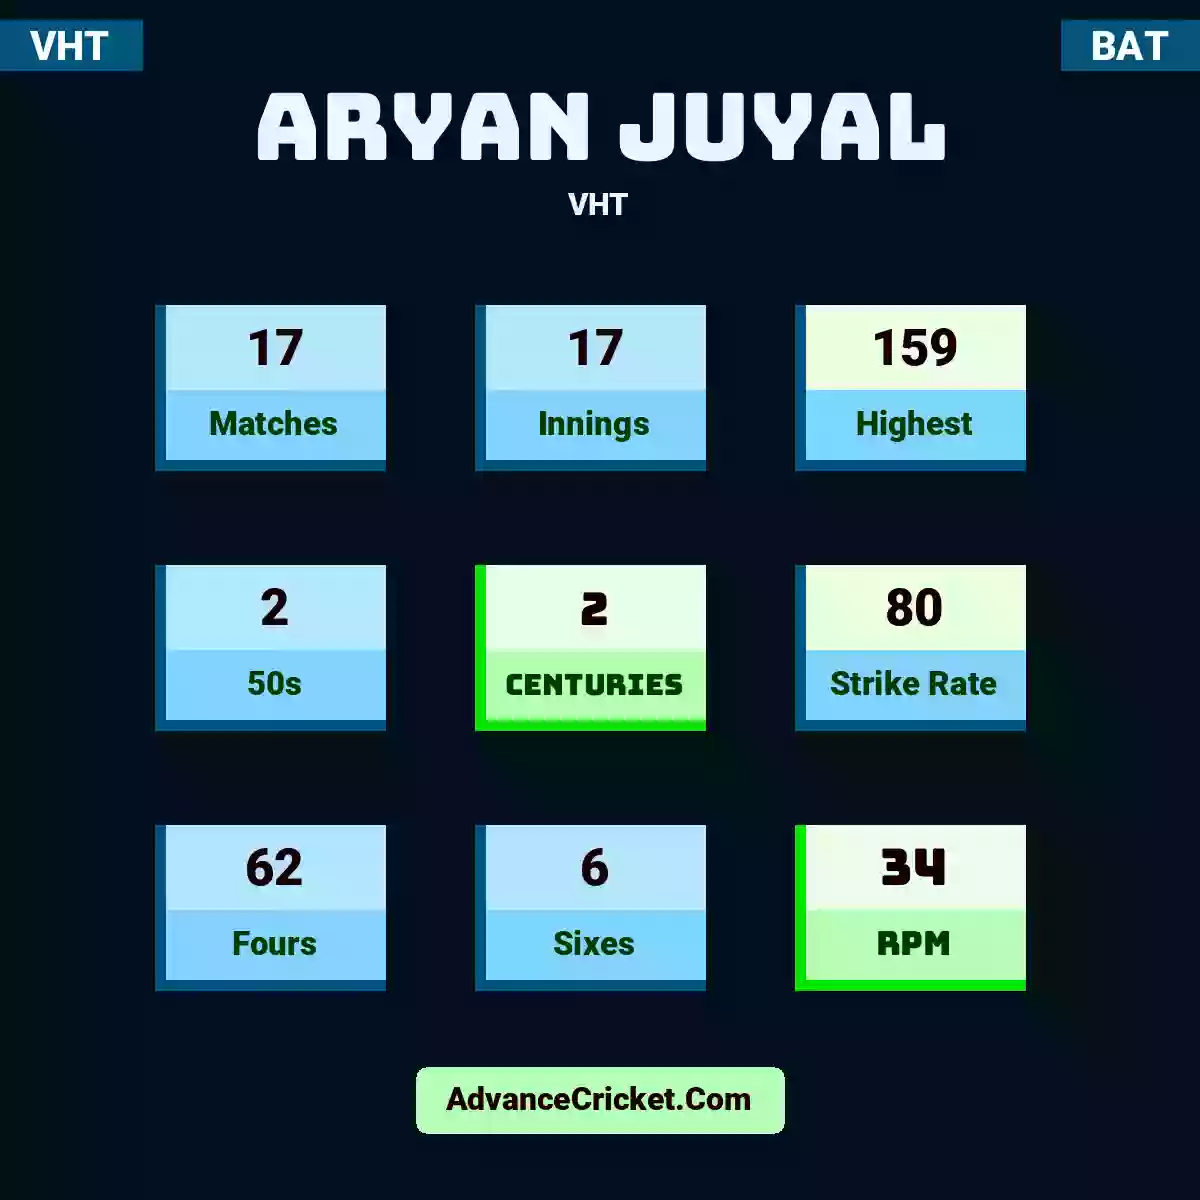 Aryan Juyal VHT , Aryan Juyal played 17 matches, scored 159 runs as highest, 2 half-centuries, and 2 centuries, with a strike rate of 80. A.Juyal hit 62 fours and 6 sixes, with an RPM of 34.